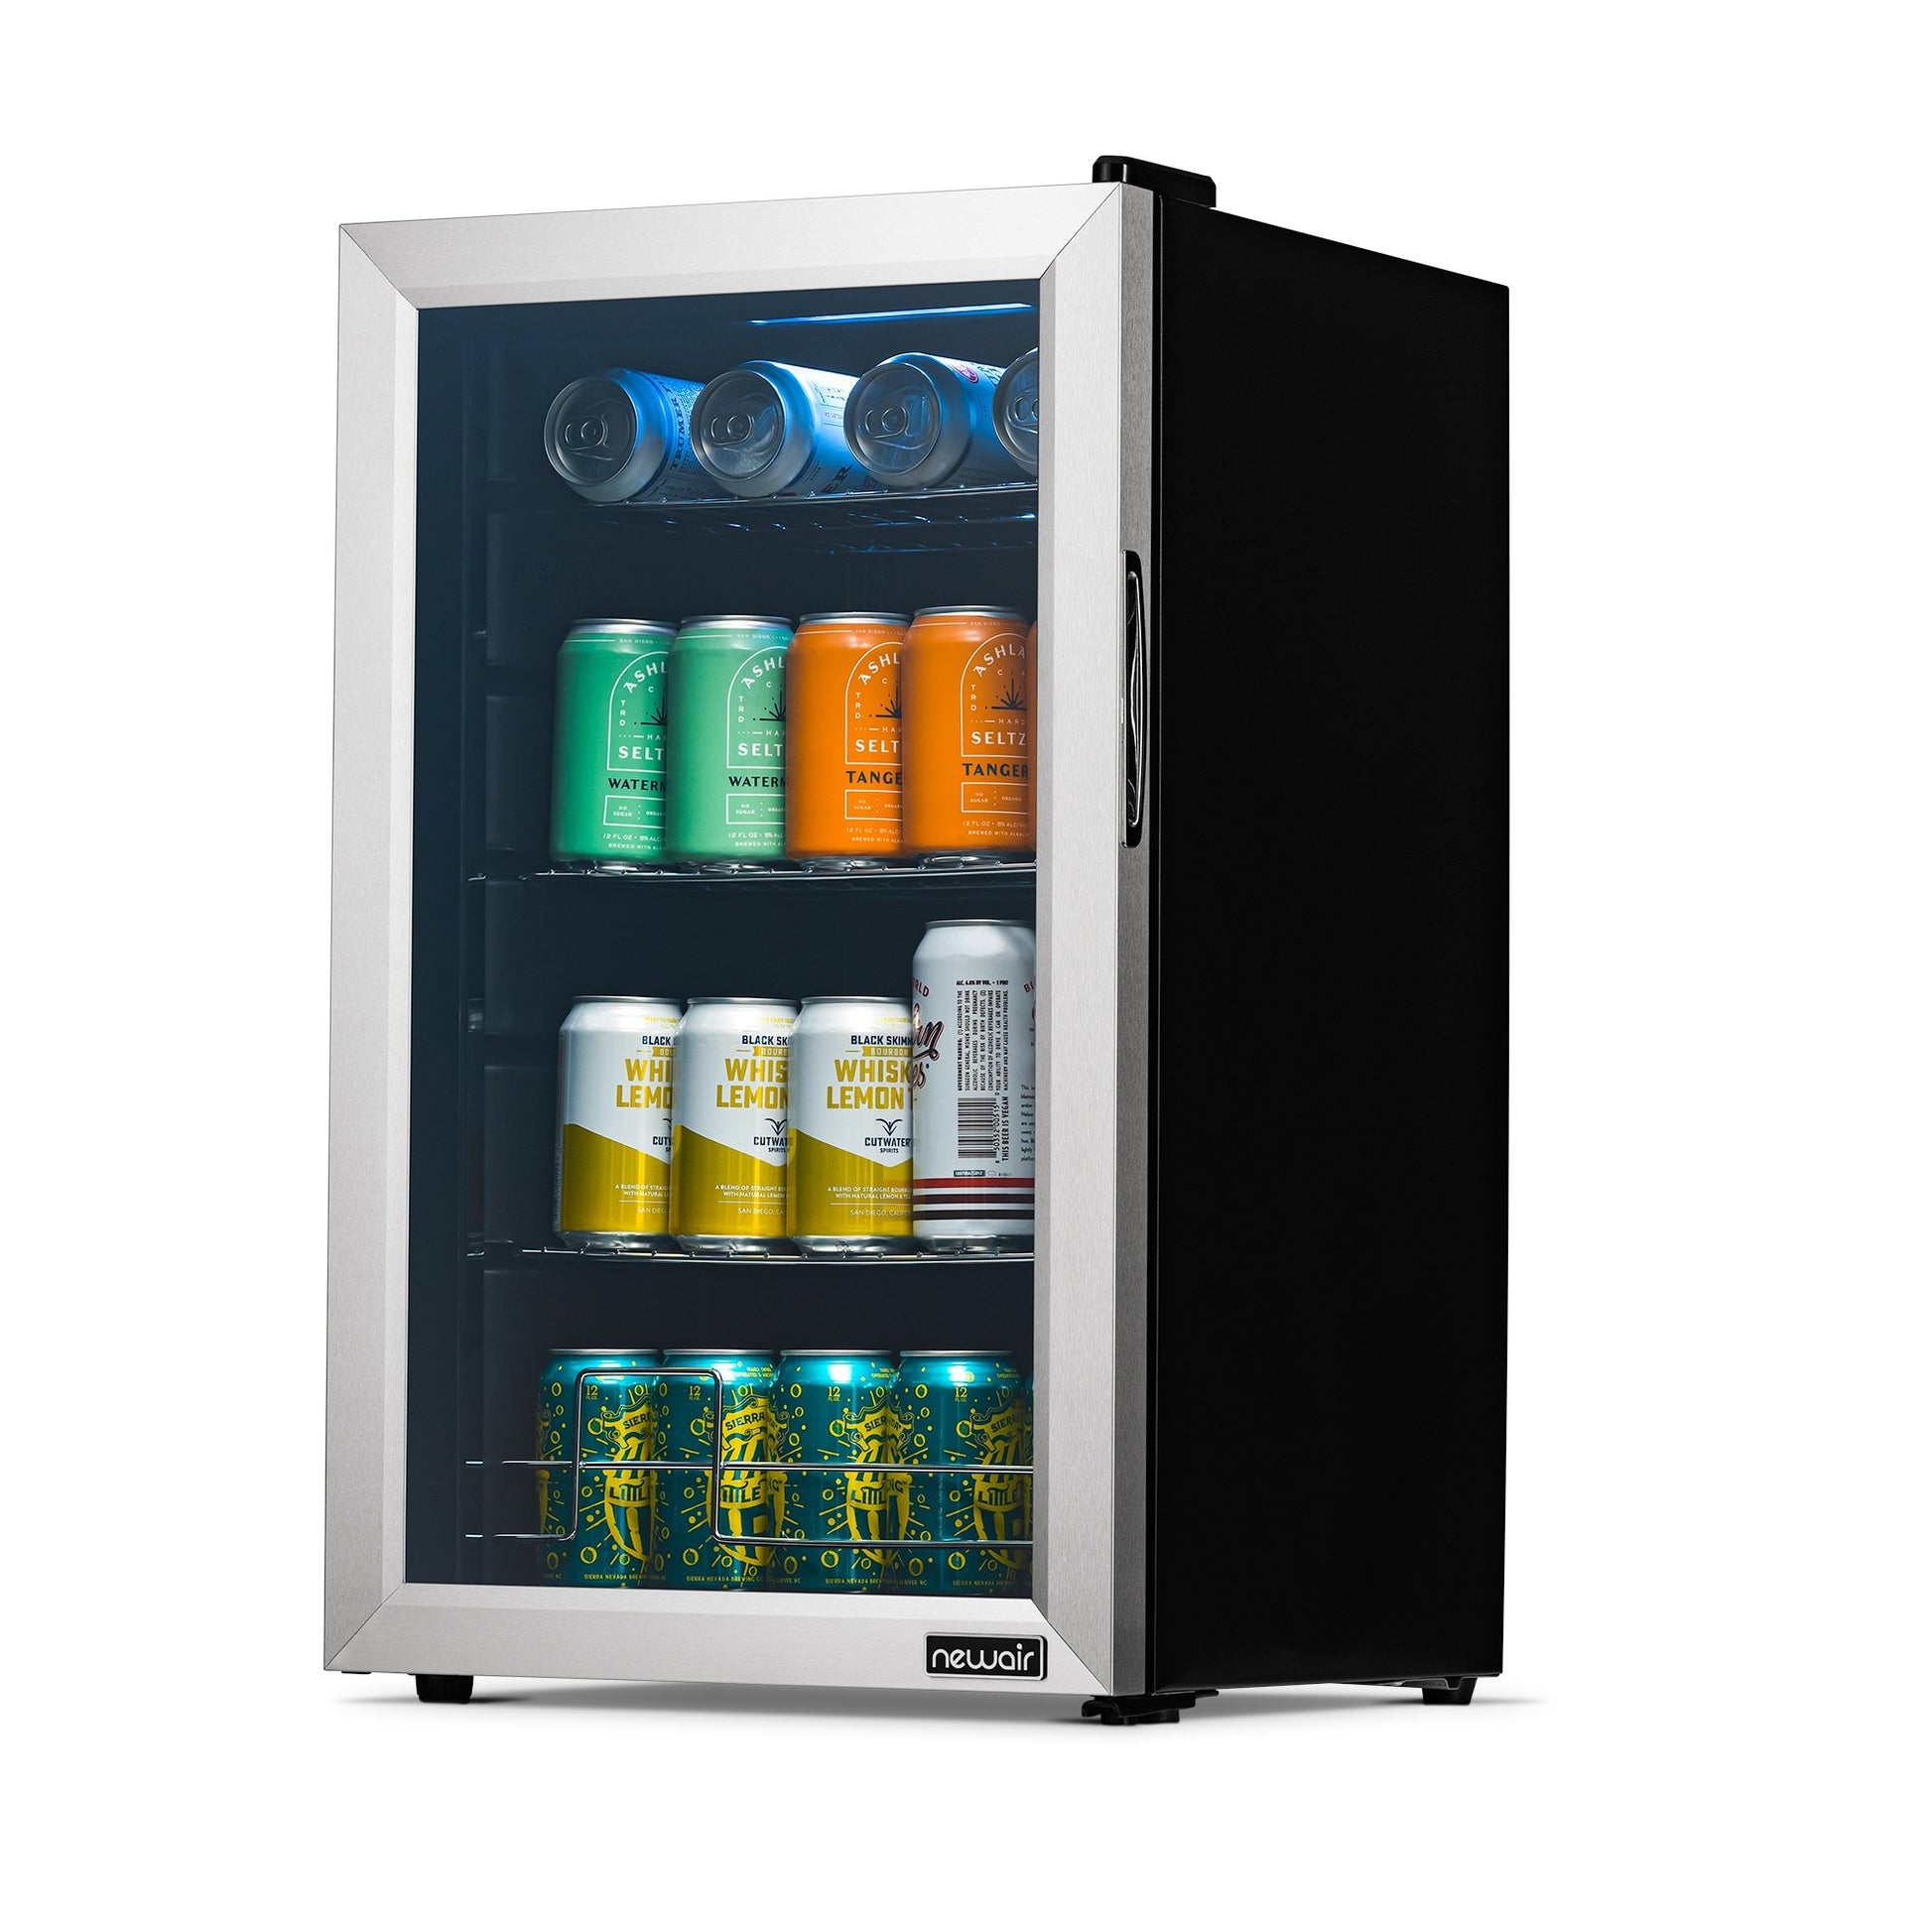 NewAir - 177-Can Beverage Cooler - Stainless Steel